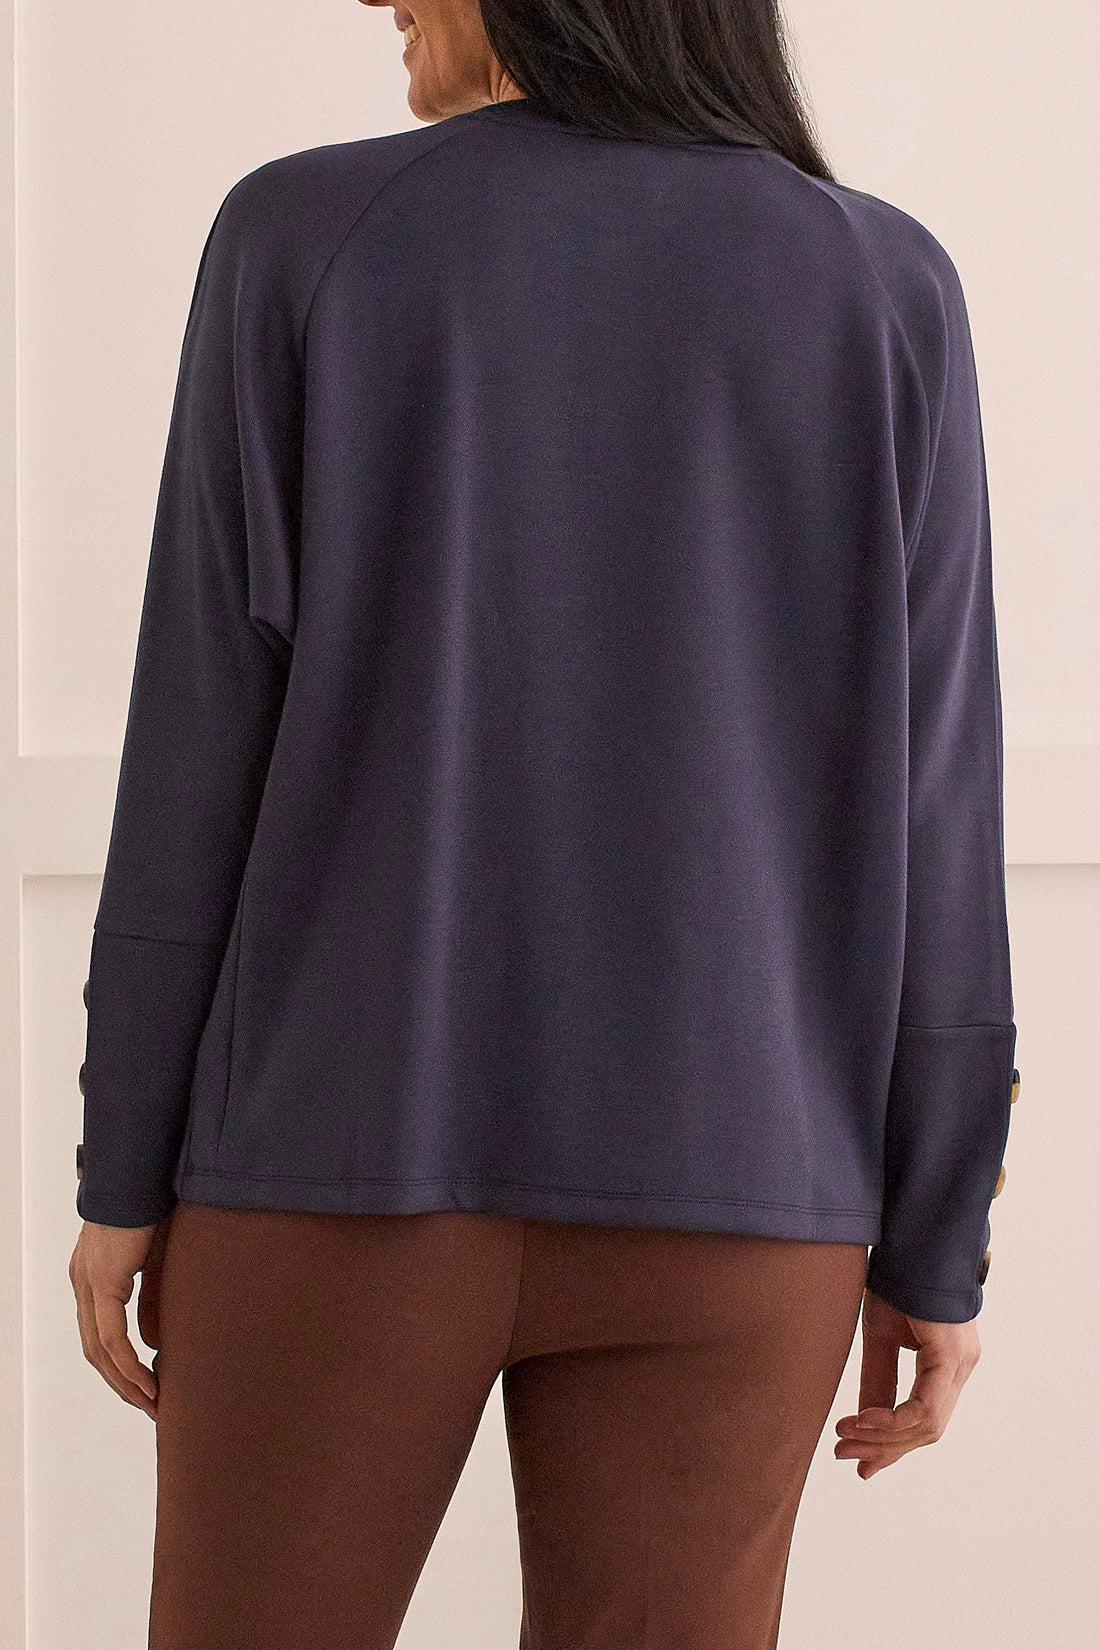 Crewneck Top With Buttons 1457O-3390